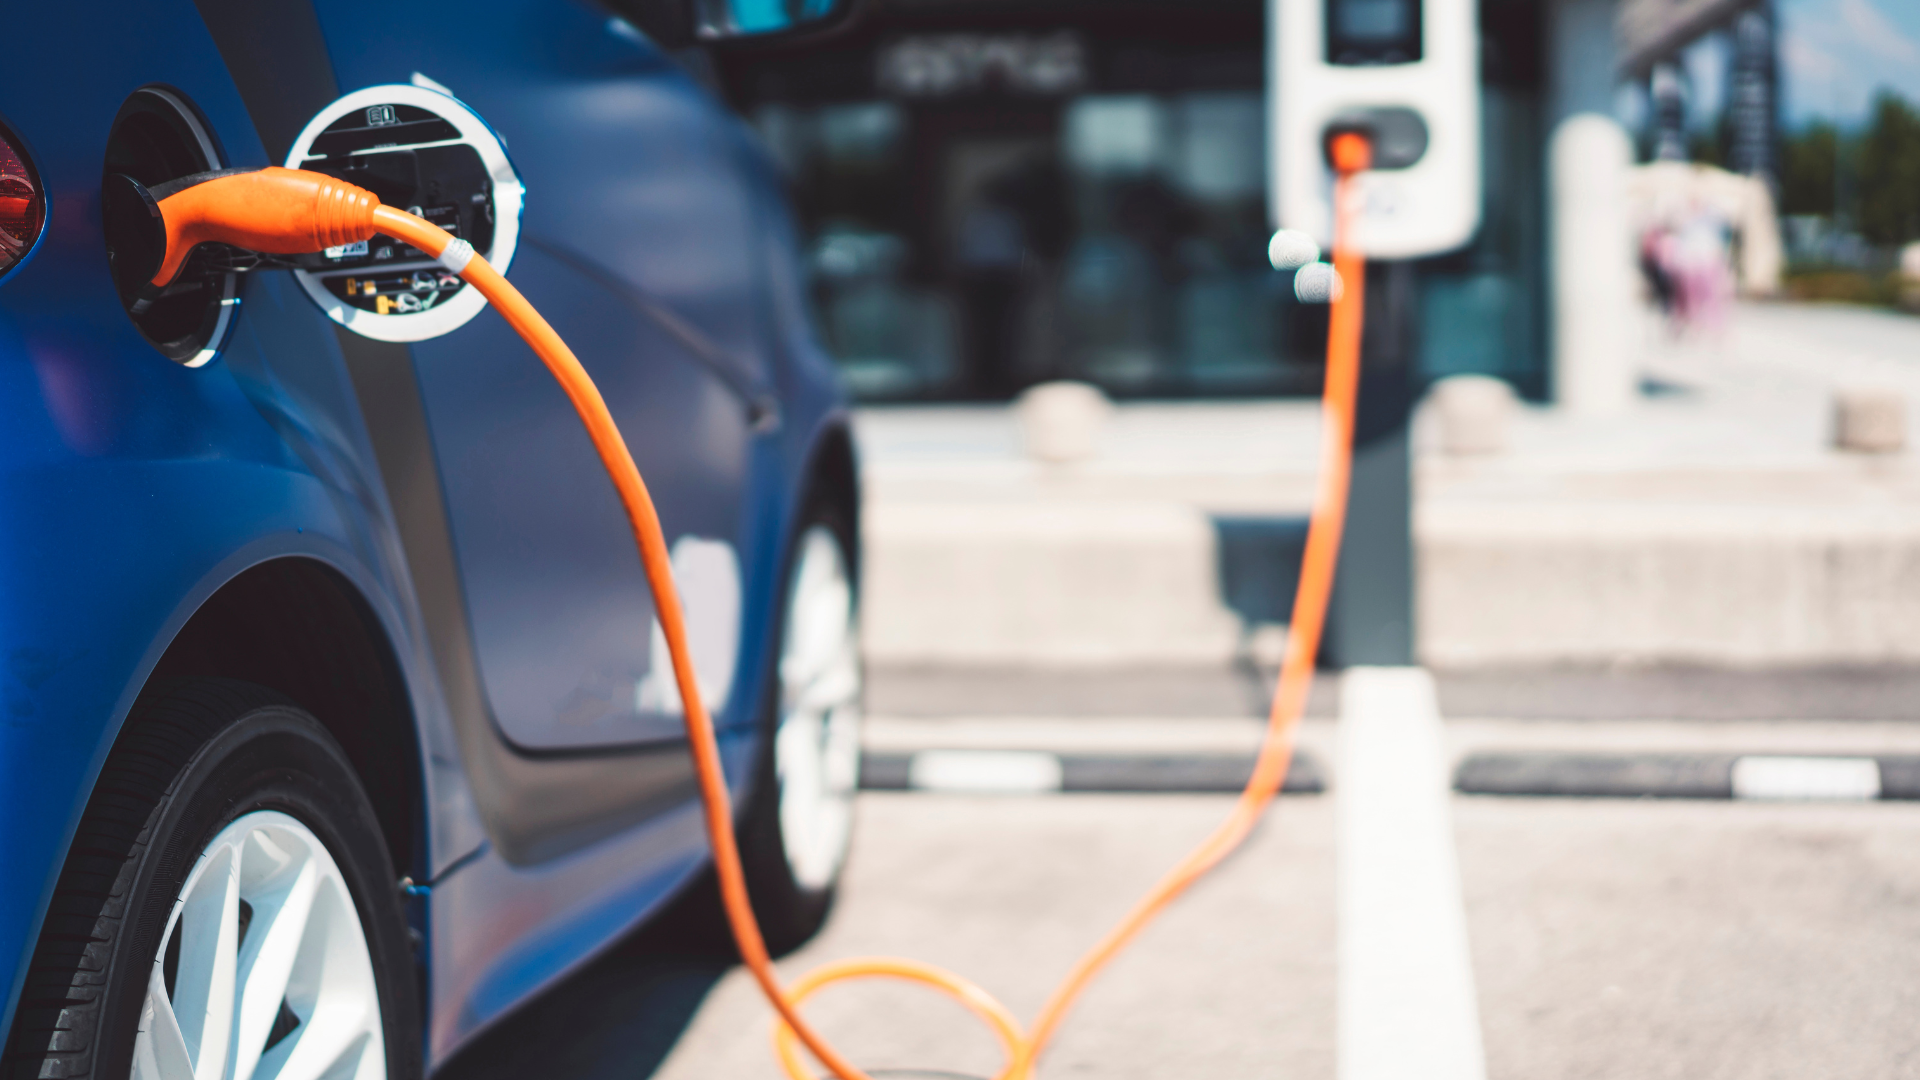 The state of Illinois aims to adopt one million electric vehicles by 2030 and to reduce its emissions by 45% by 2035, in accordance with the Climate and Equitable Jobs Act.